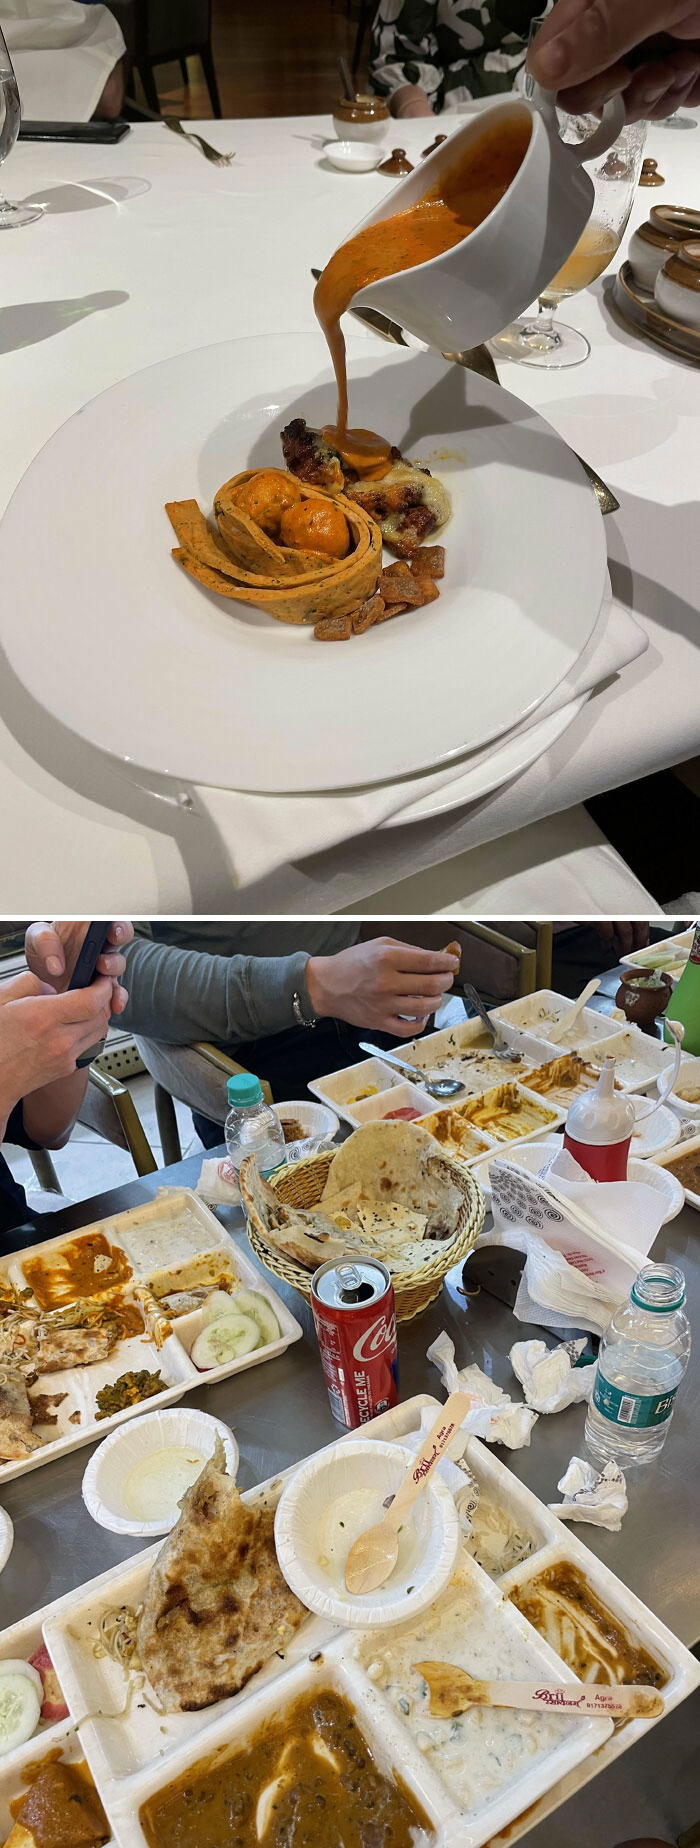 Went To A Fancy Restaurant In India, Bill Was ~40,000 Rupees. Next Day Went To Regular Restaurant, Bill Was ~1000 Rupees And It Was 100 Times Better